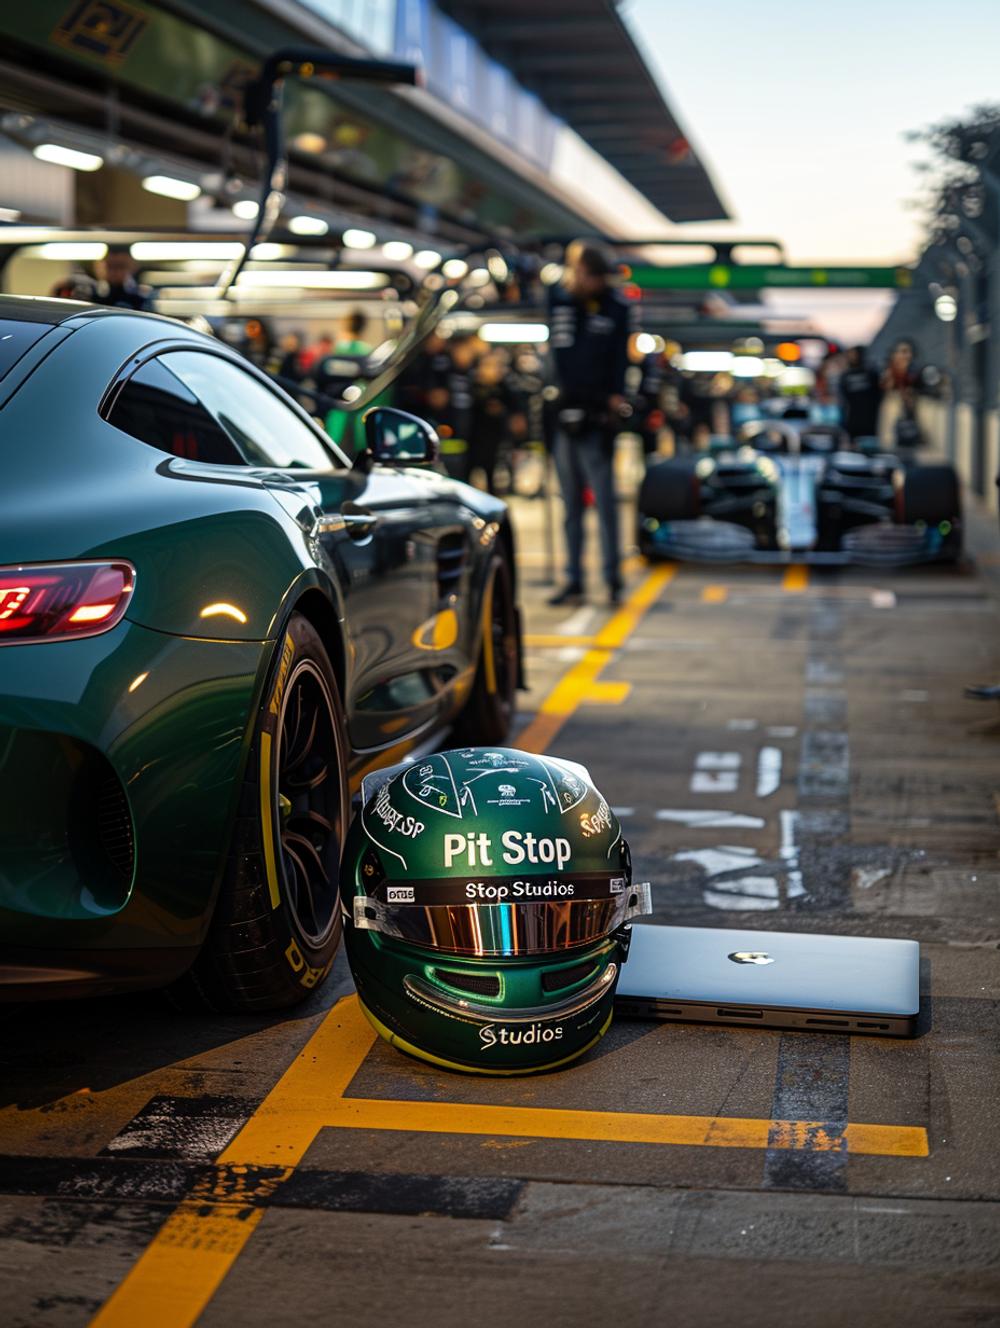 a minimalistic green F1 driver helmet with text "Pit Stop Studios" placed next to a Macbook sitting next to an F1 car in a pit stop, midday broad daylight, sports photography, Leica Q4